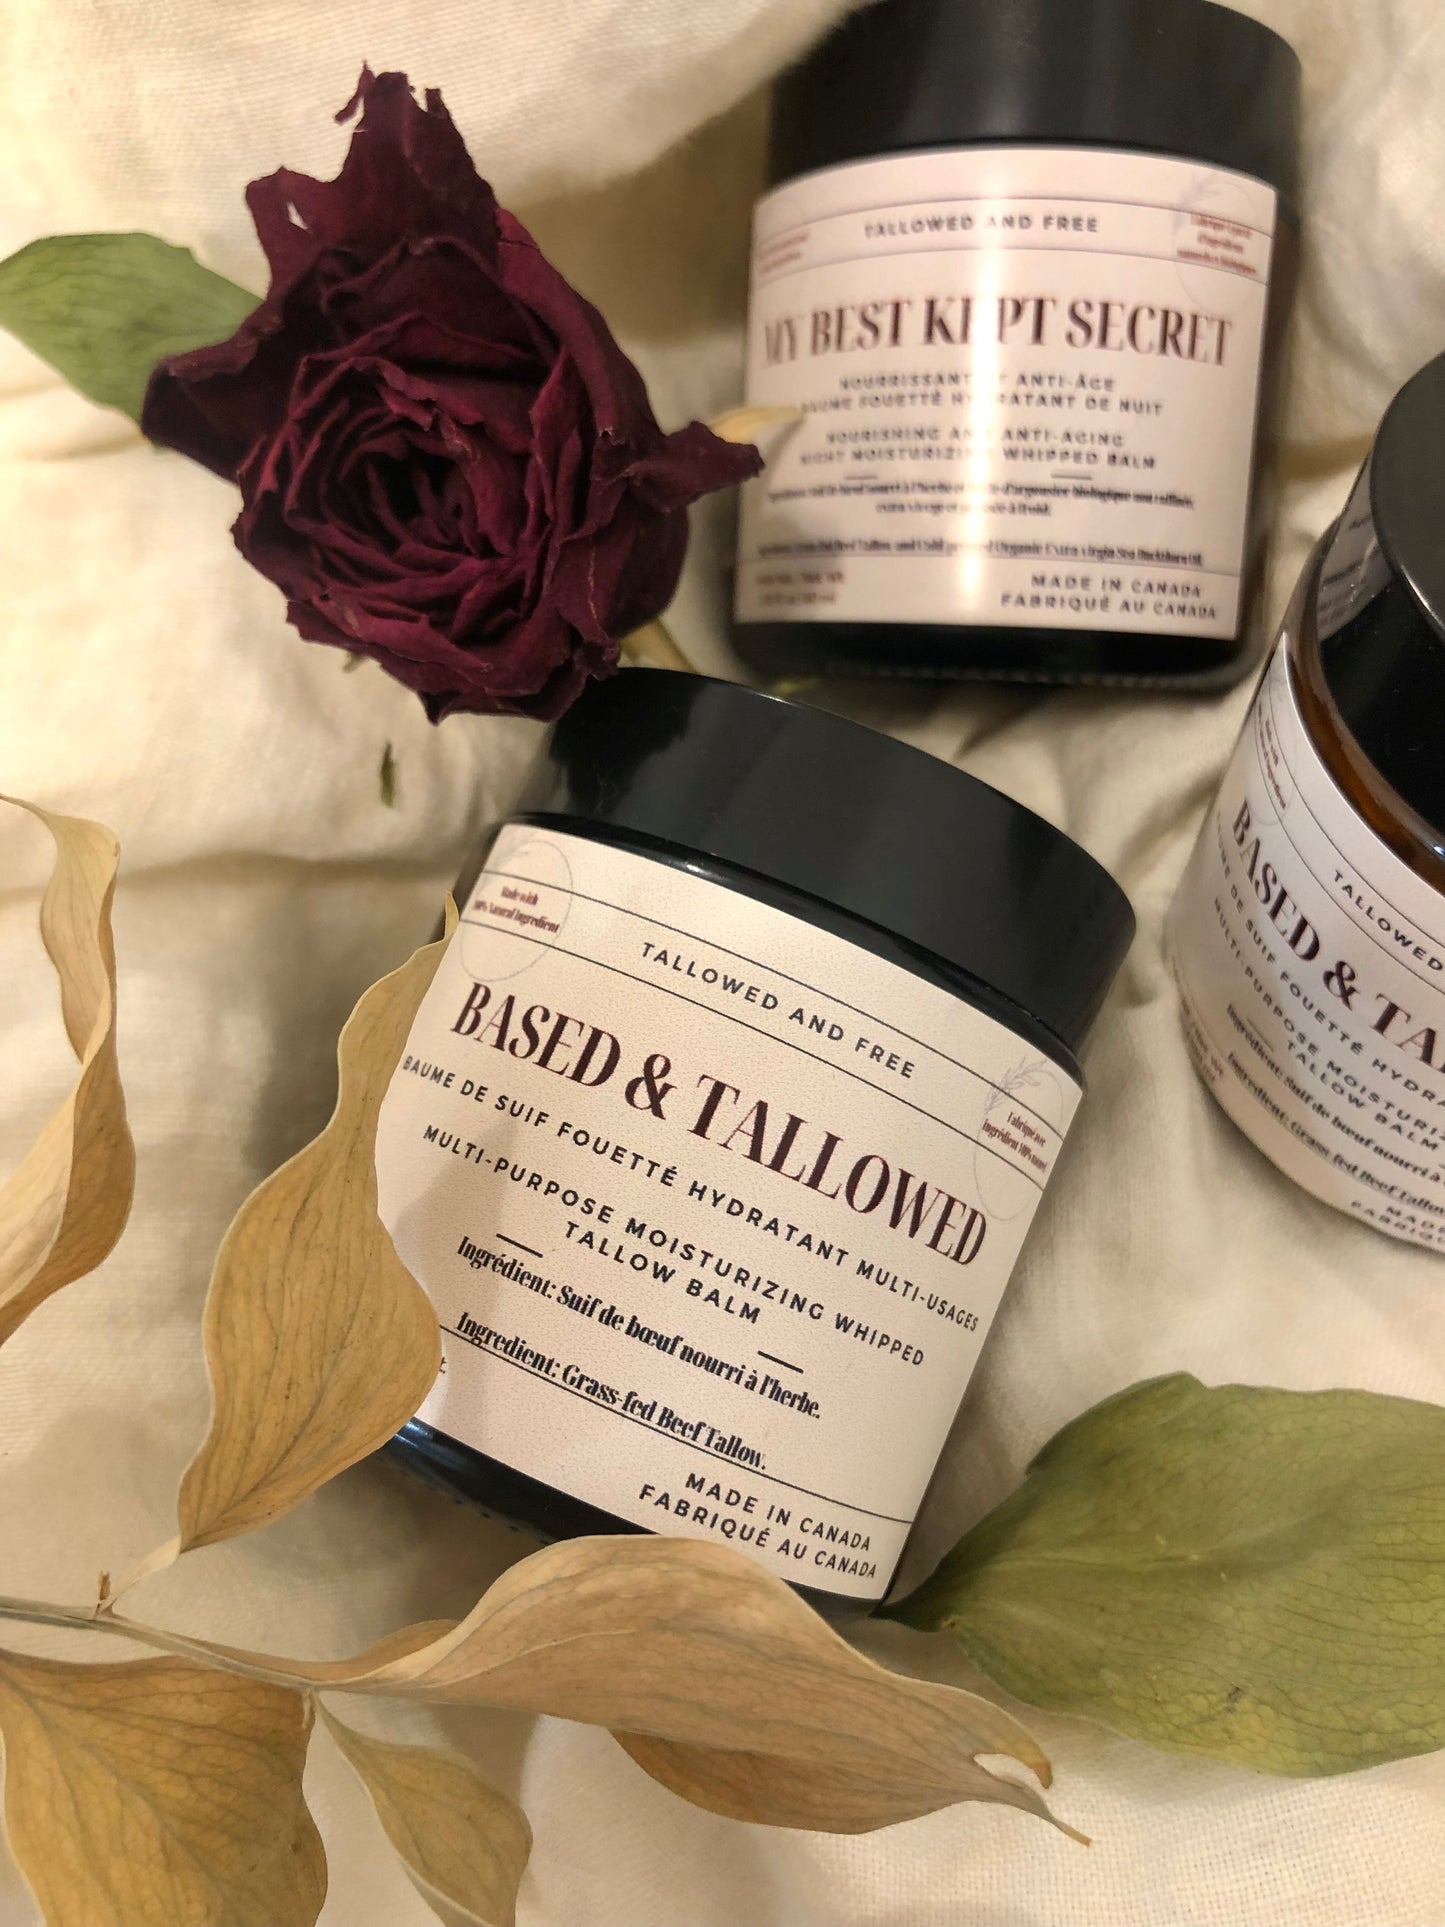 Based & Tallowed: Unscented Tallow Balm (Whipped and Solid Options ) - 100 & 75 ml